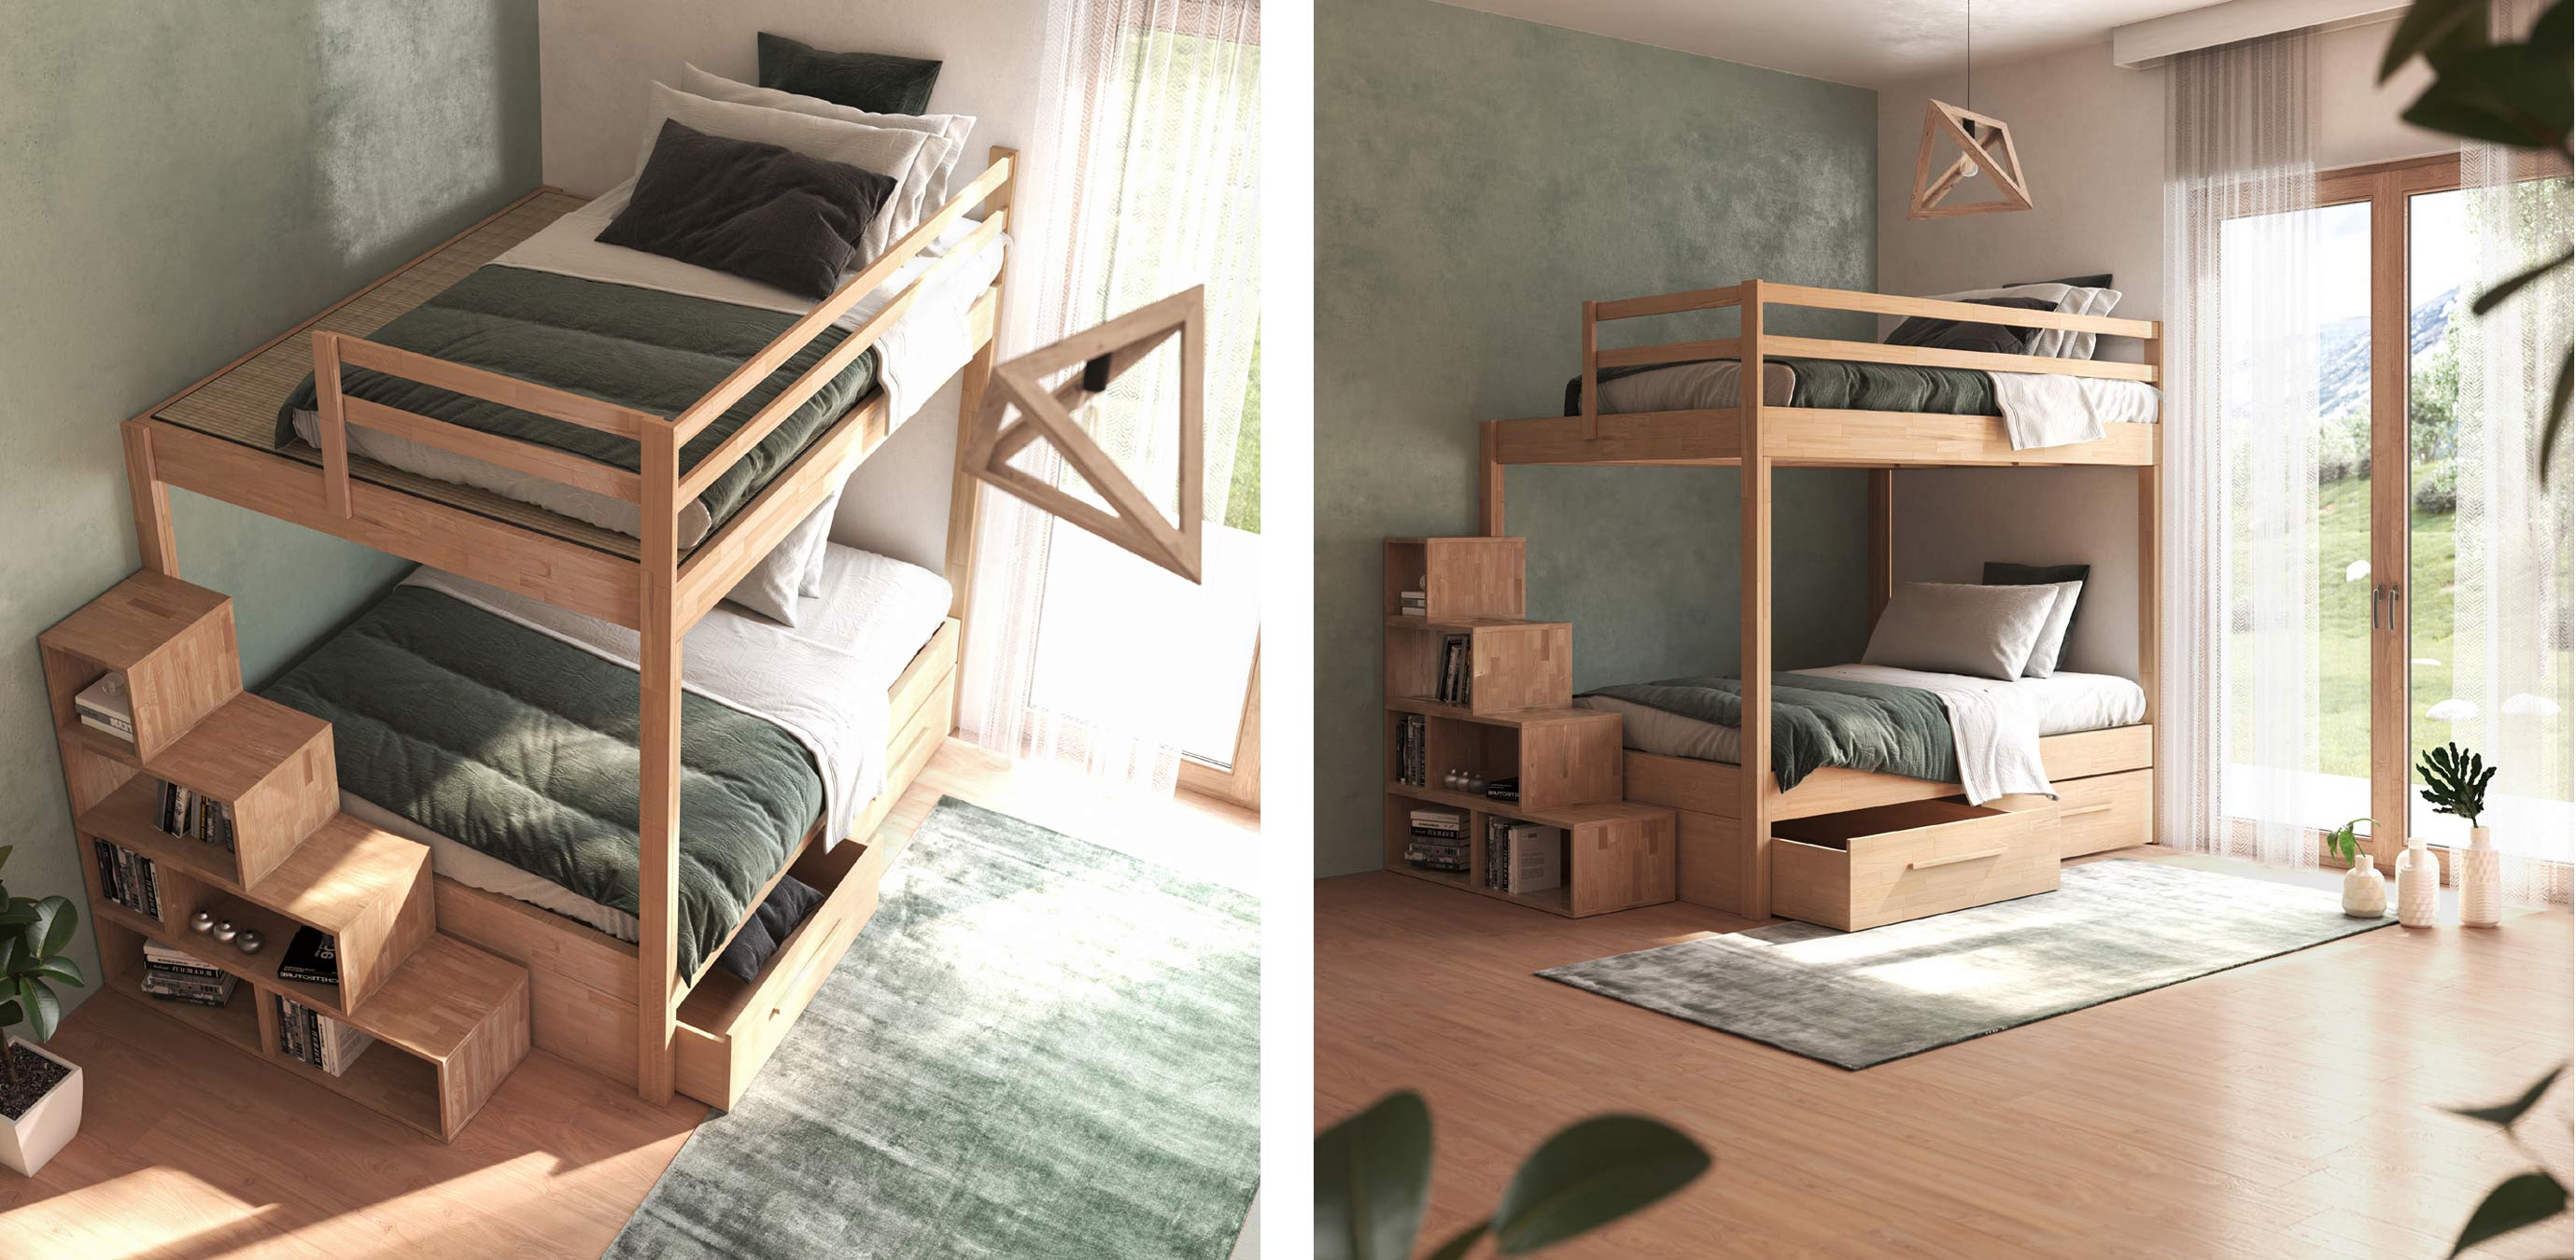 Bunk bed SpazioBed in solid wood